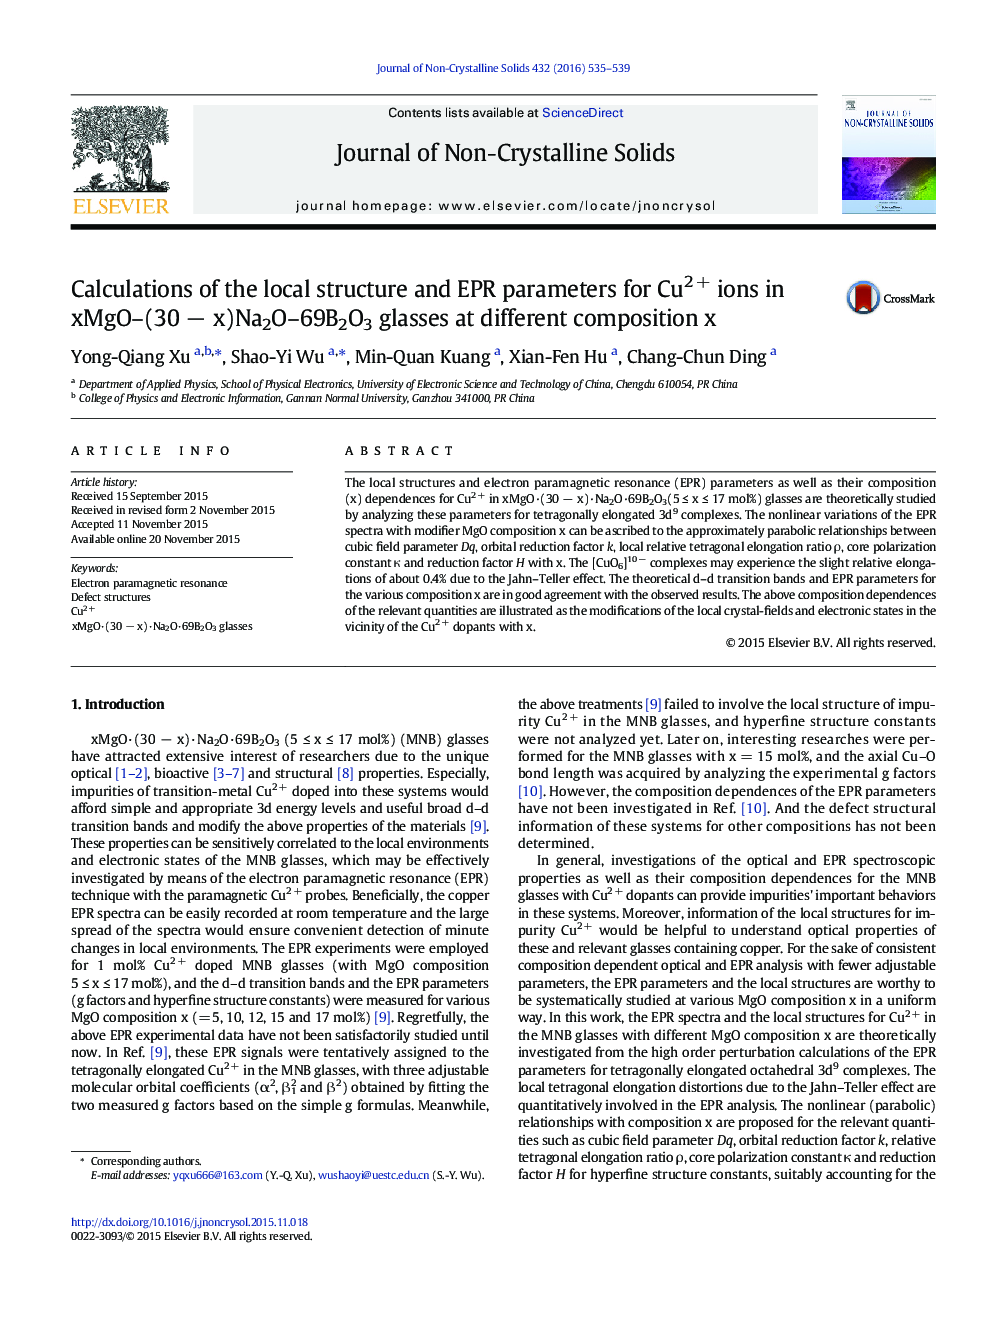 Calculations of the local structure and EPR parameters for Cu2Â + ions in xMgO-(30Â âÂ x)Na2O-69B2O3 glasses at different composition x